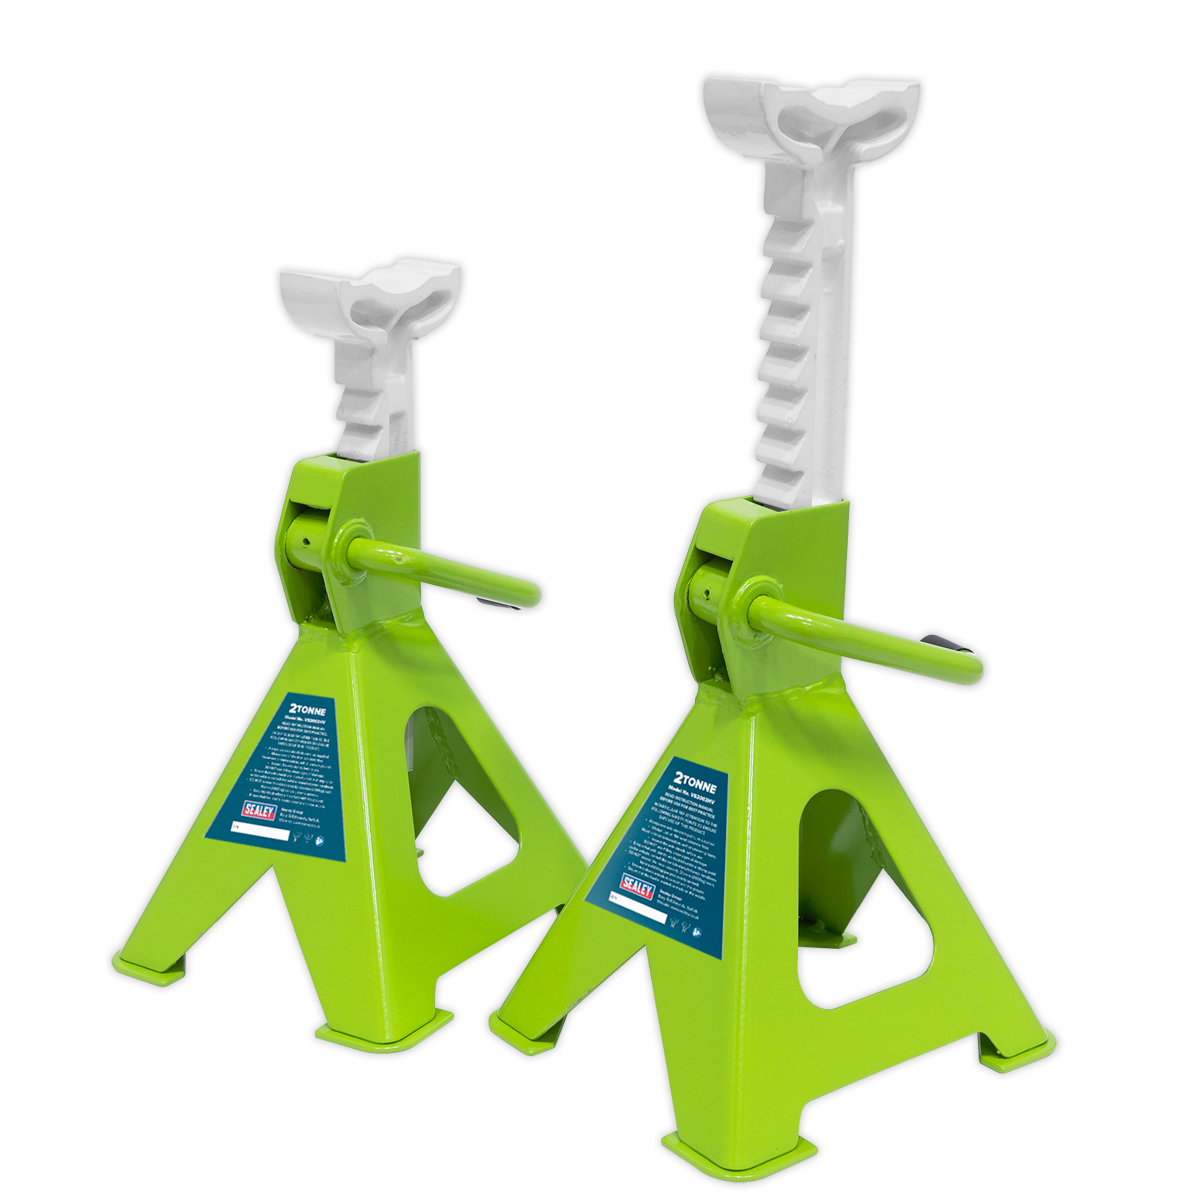 SEALEY - VS2002HV Axle Stands (Pair) 2tonne Capacity per Stand Ratchet Type - Hi-Vis Green